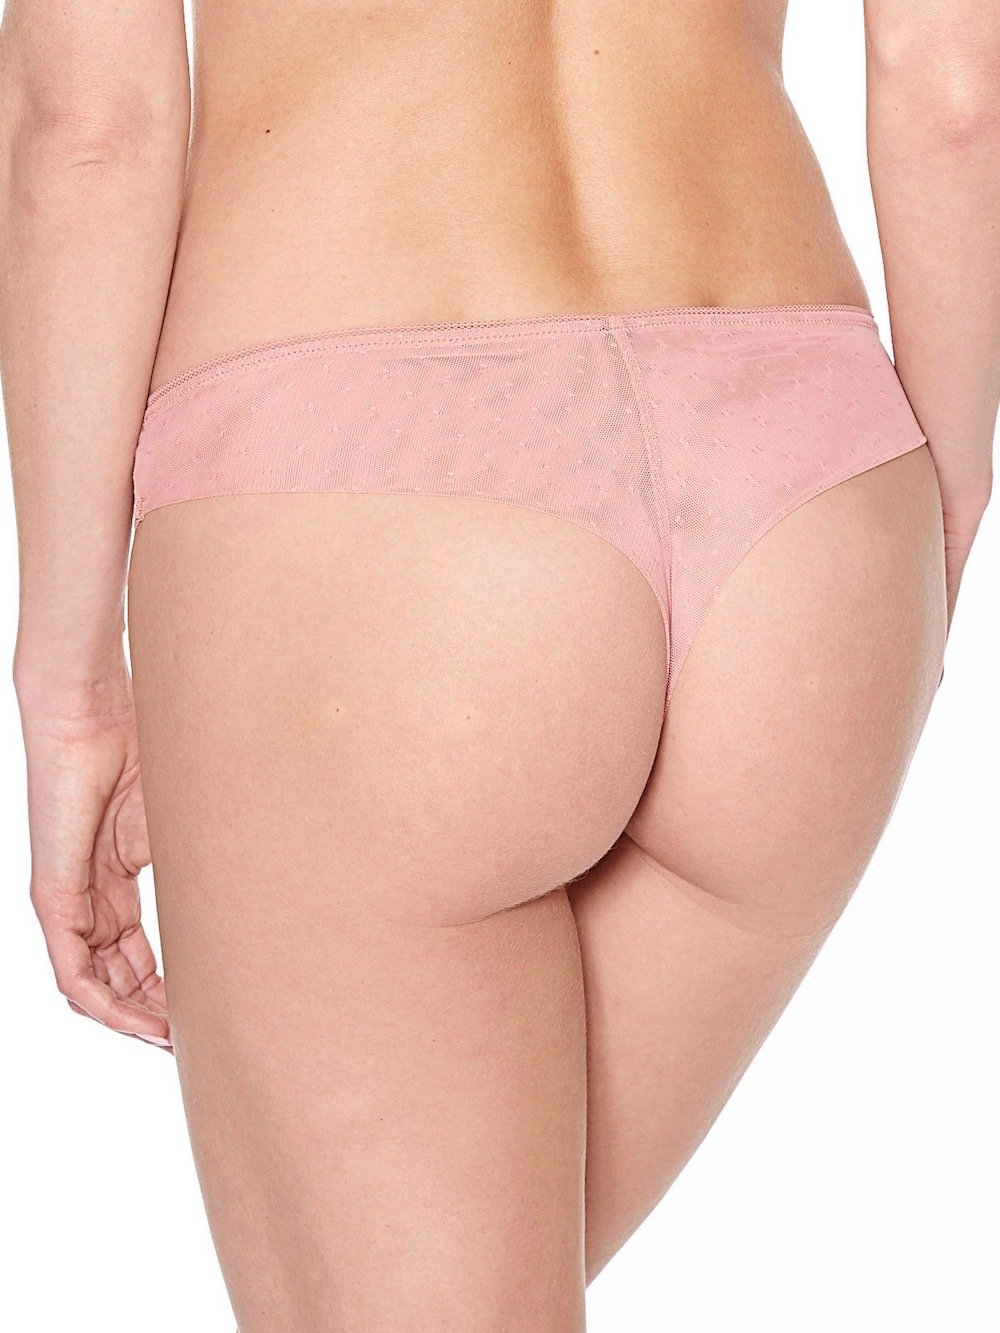 Addiction Nouvelle Lingerie THONGS S / Pink Addiction Shall We Dance Thong Panties